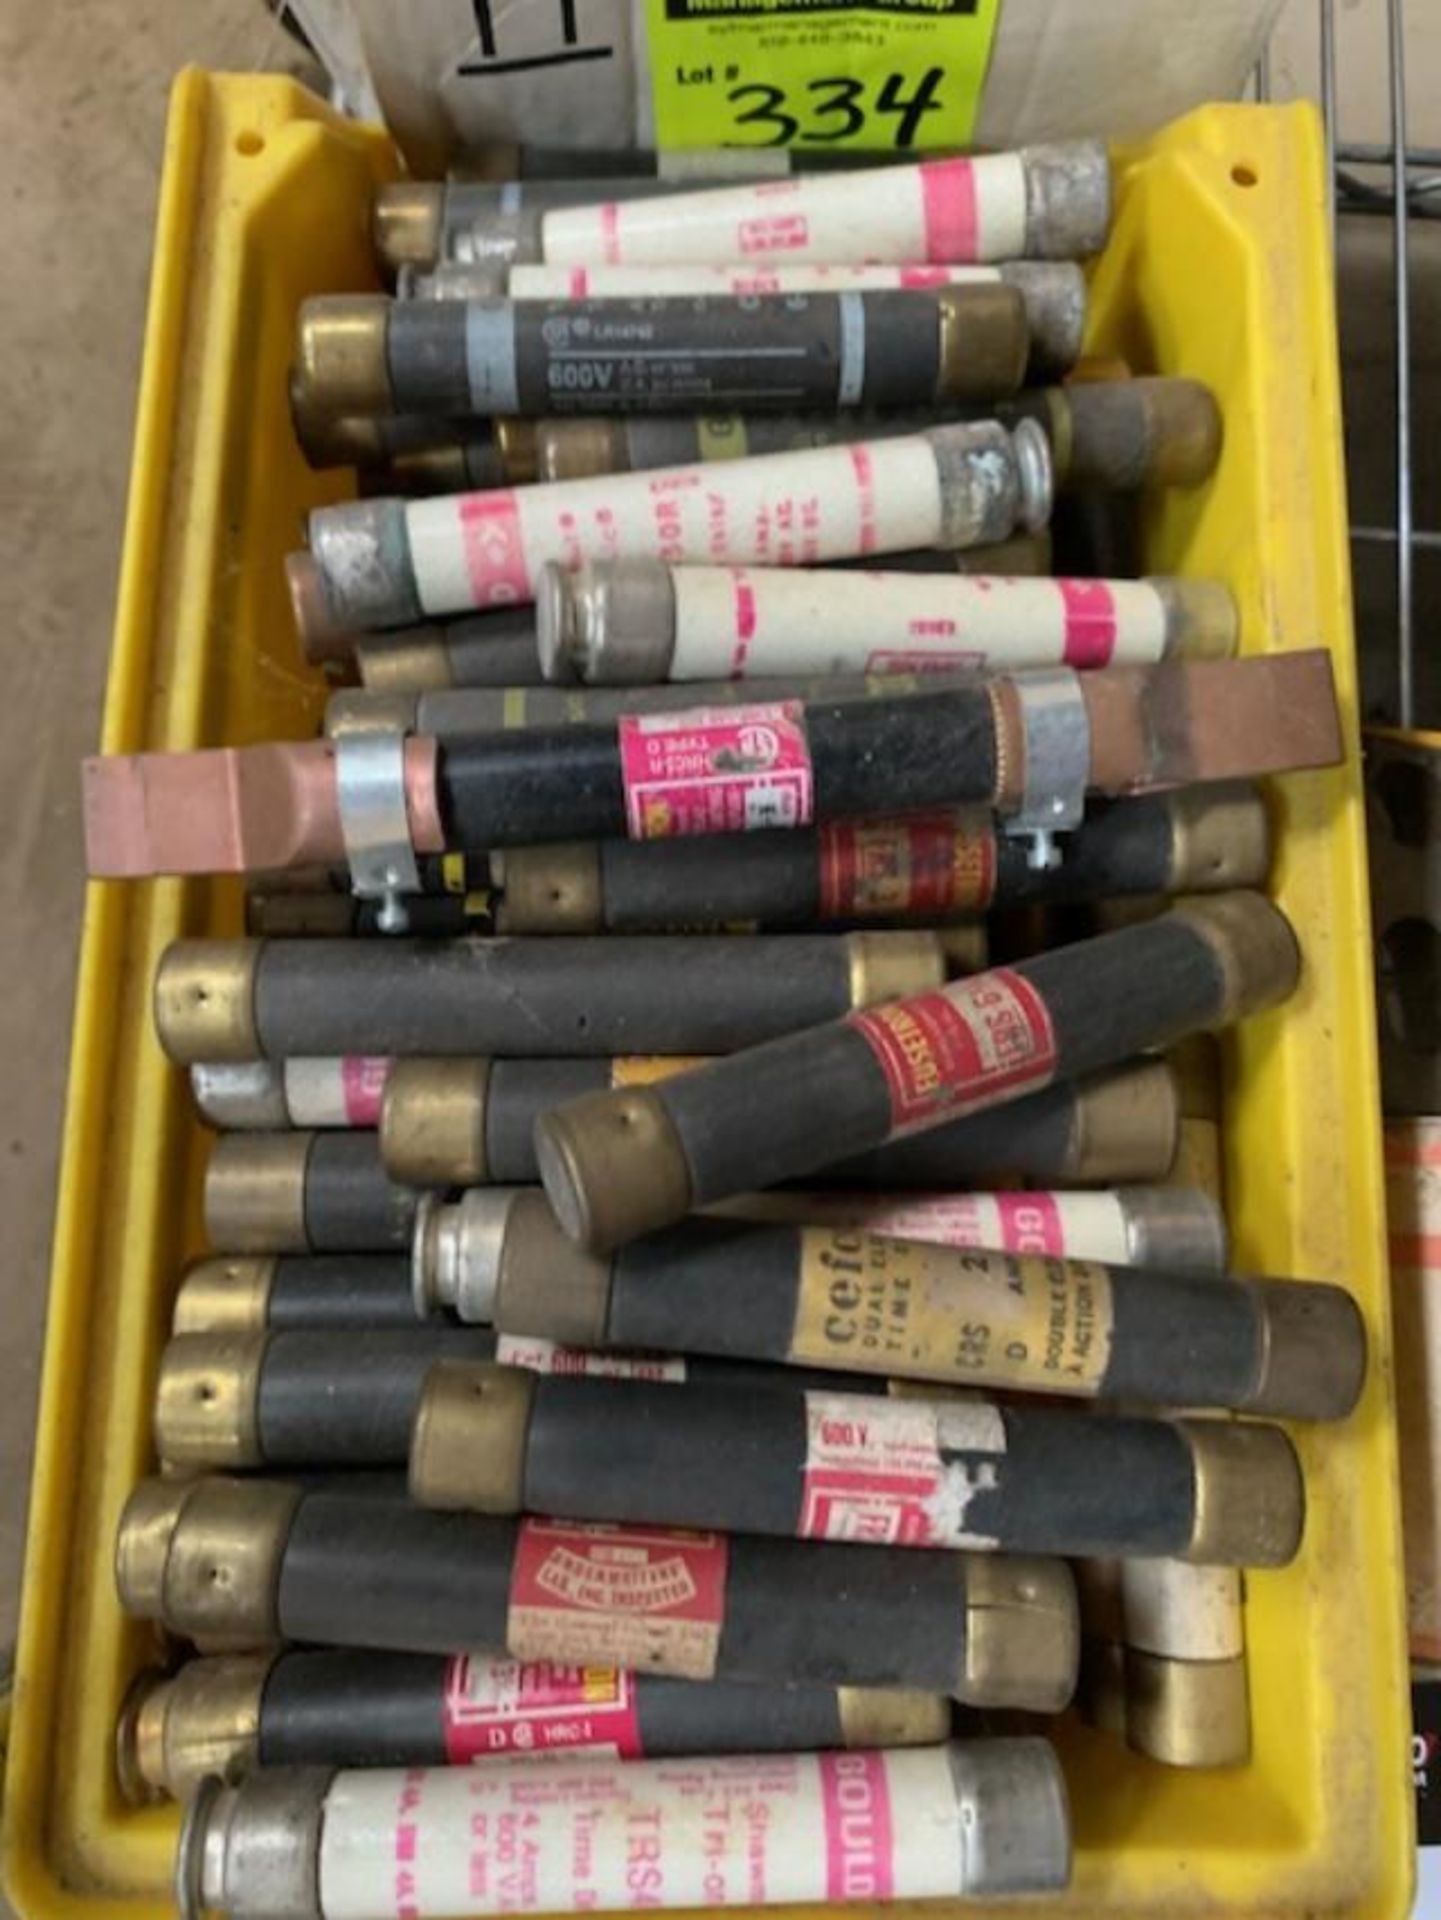 LOT OF ASSORTED FUSES, DUAL-ELEMENT FUSE, FRS 4 ½, 600 VOLTS, SHAWMUT TRI-ONIC, TRS4R, 4 AMPS 600 - Image 2 of 3